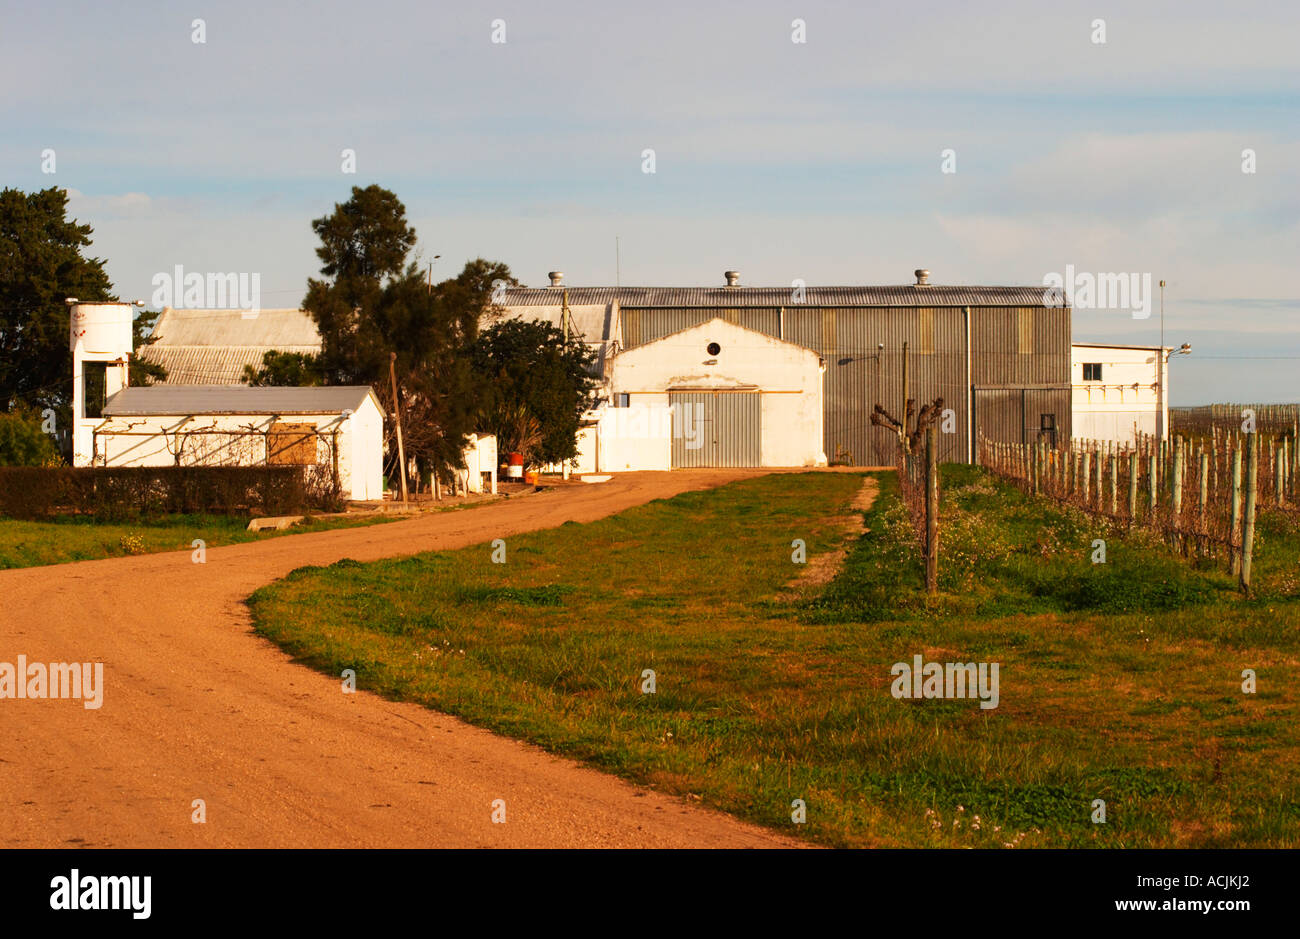 The winery building and the vineyard. Vinedos y Bodega Filgueira Winery, Cuchilla Verde, Canelones, Montevideo, Uruguay, South America Stock Photo